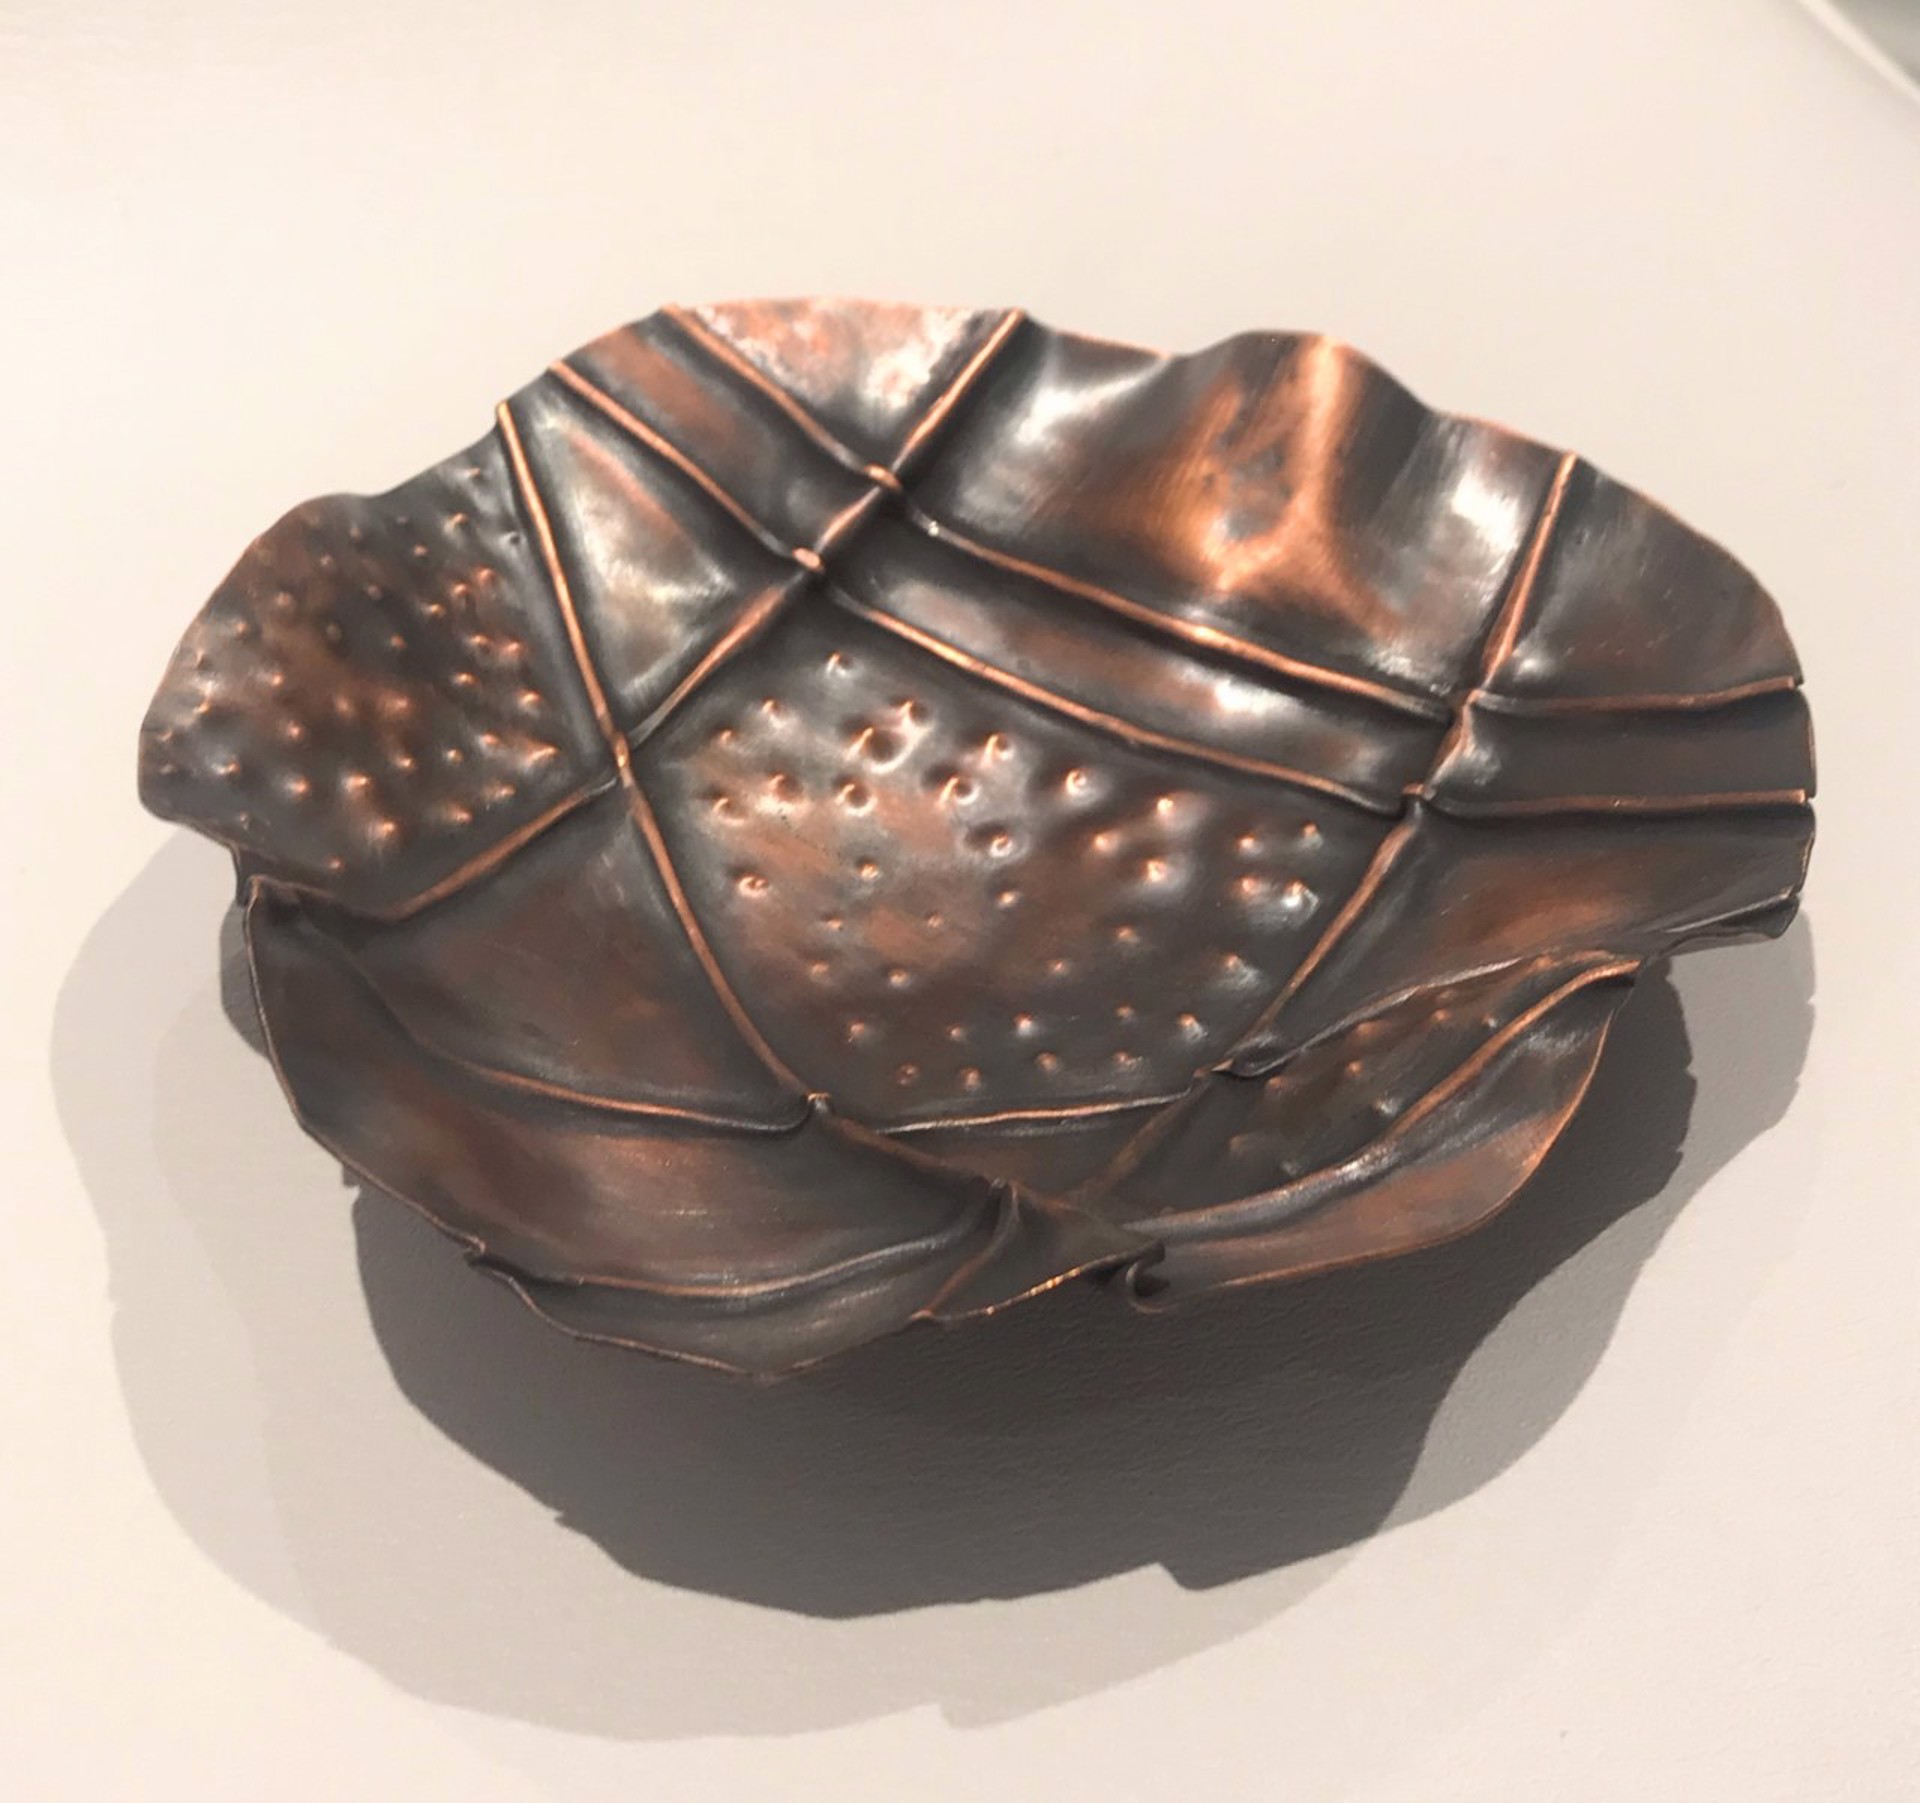 "Copper Bowl With Folds & Pebble Texture" by Nicole Josette